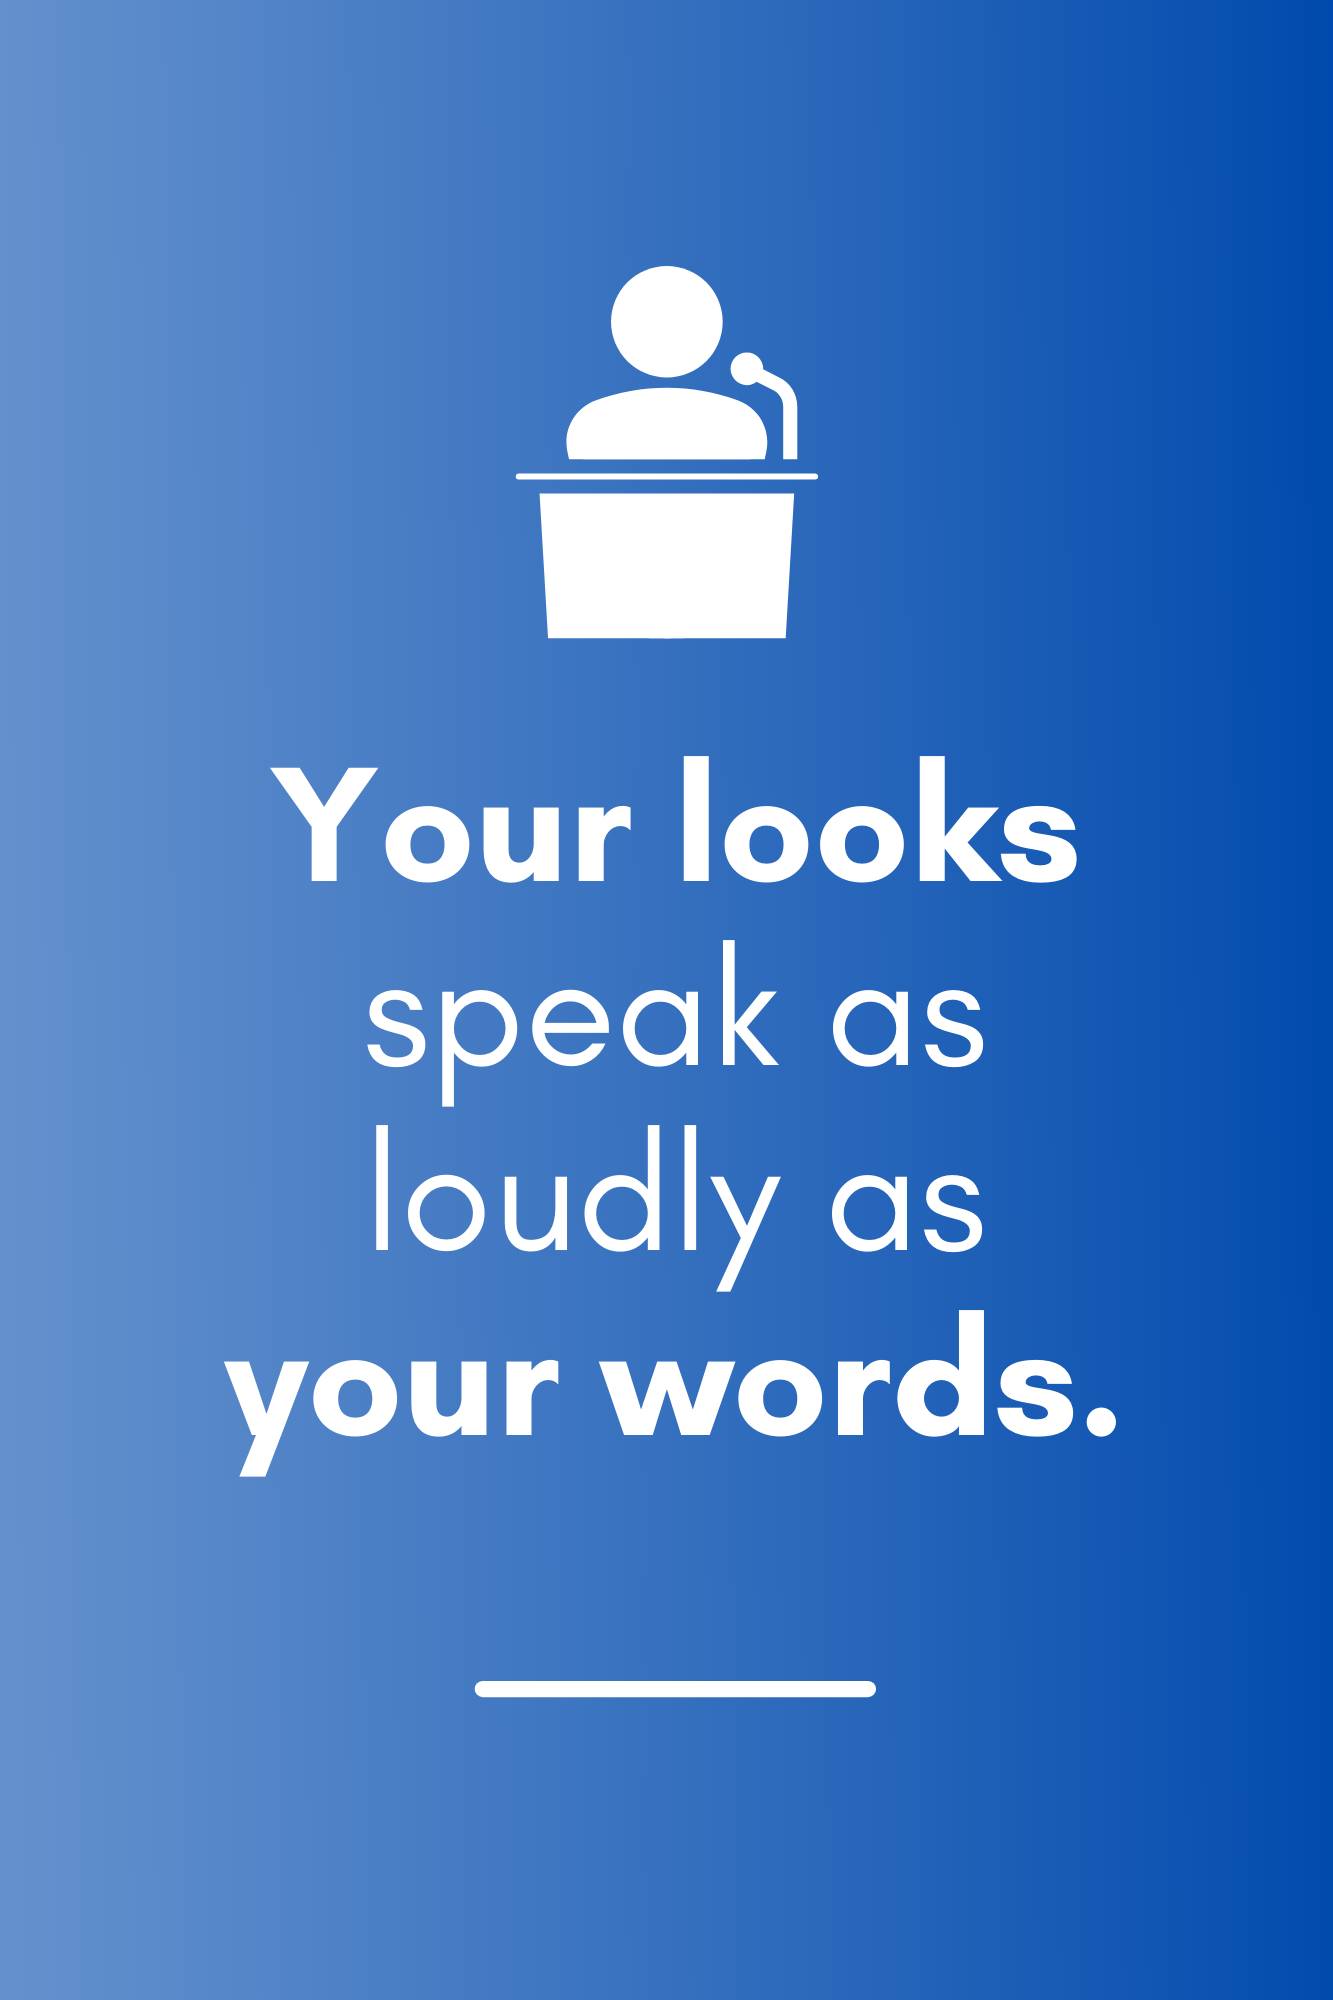 Your looks speak as loudly as your words.